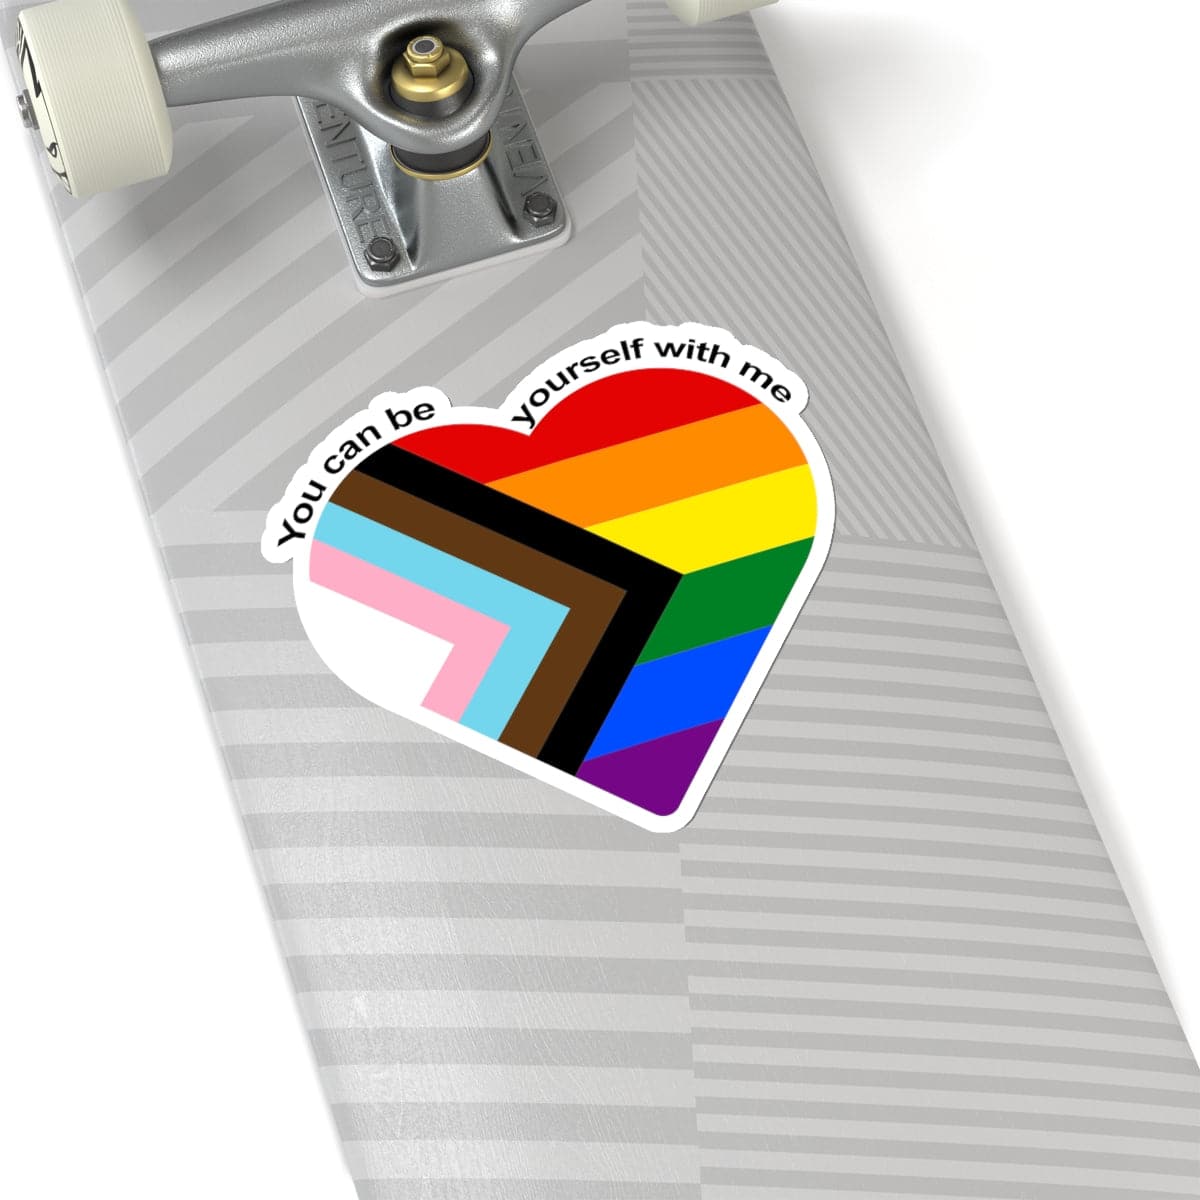 You Can Be Yourself With Me Kiss-Cut Stickers - PrideBooth